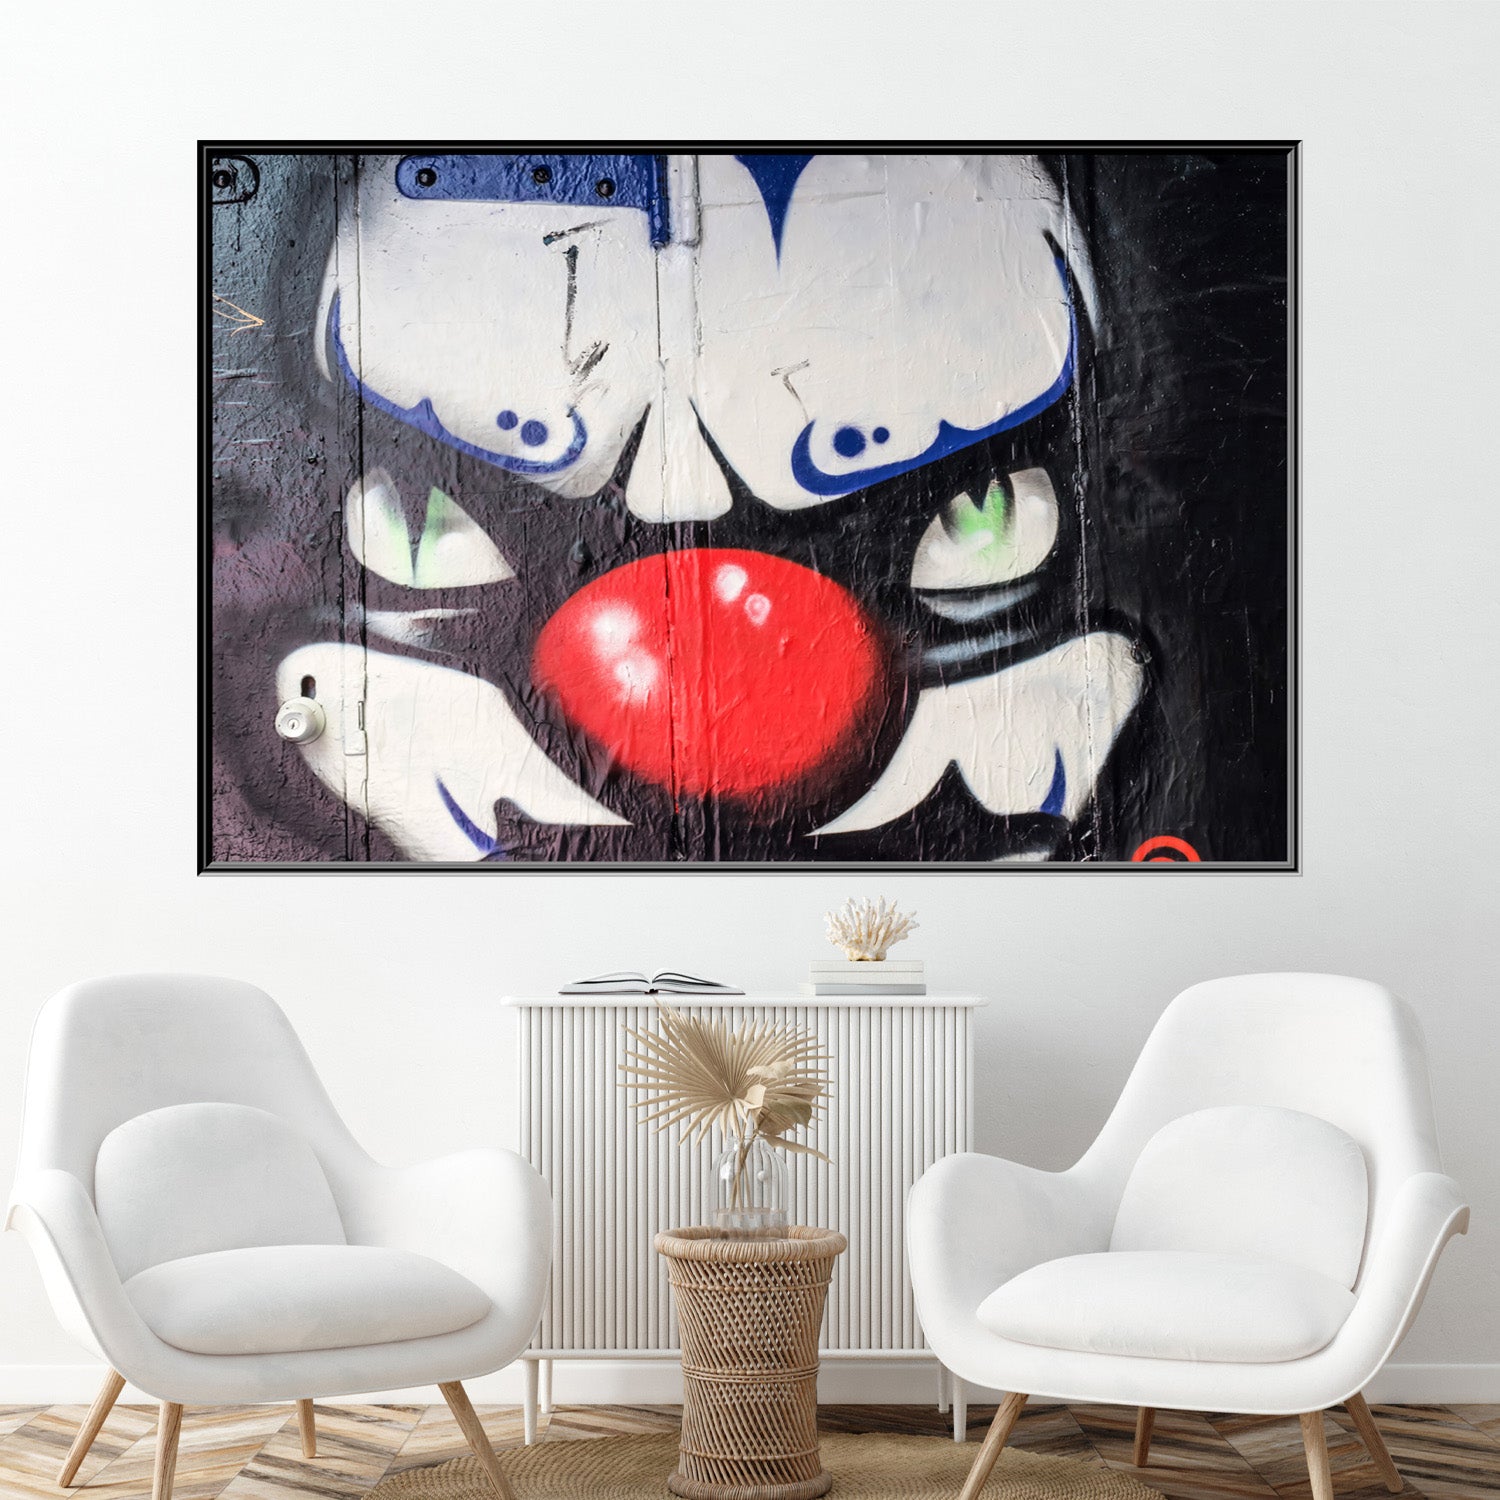 https://cdn.shopify.com/s/files/1/0387/9986/8044/products/TheClownCanvasArtPrintStretched-3.jpg